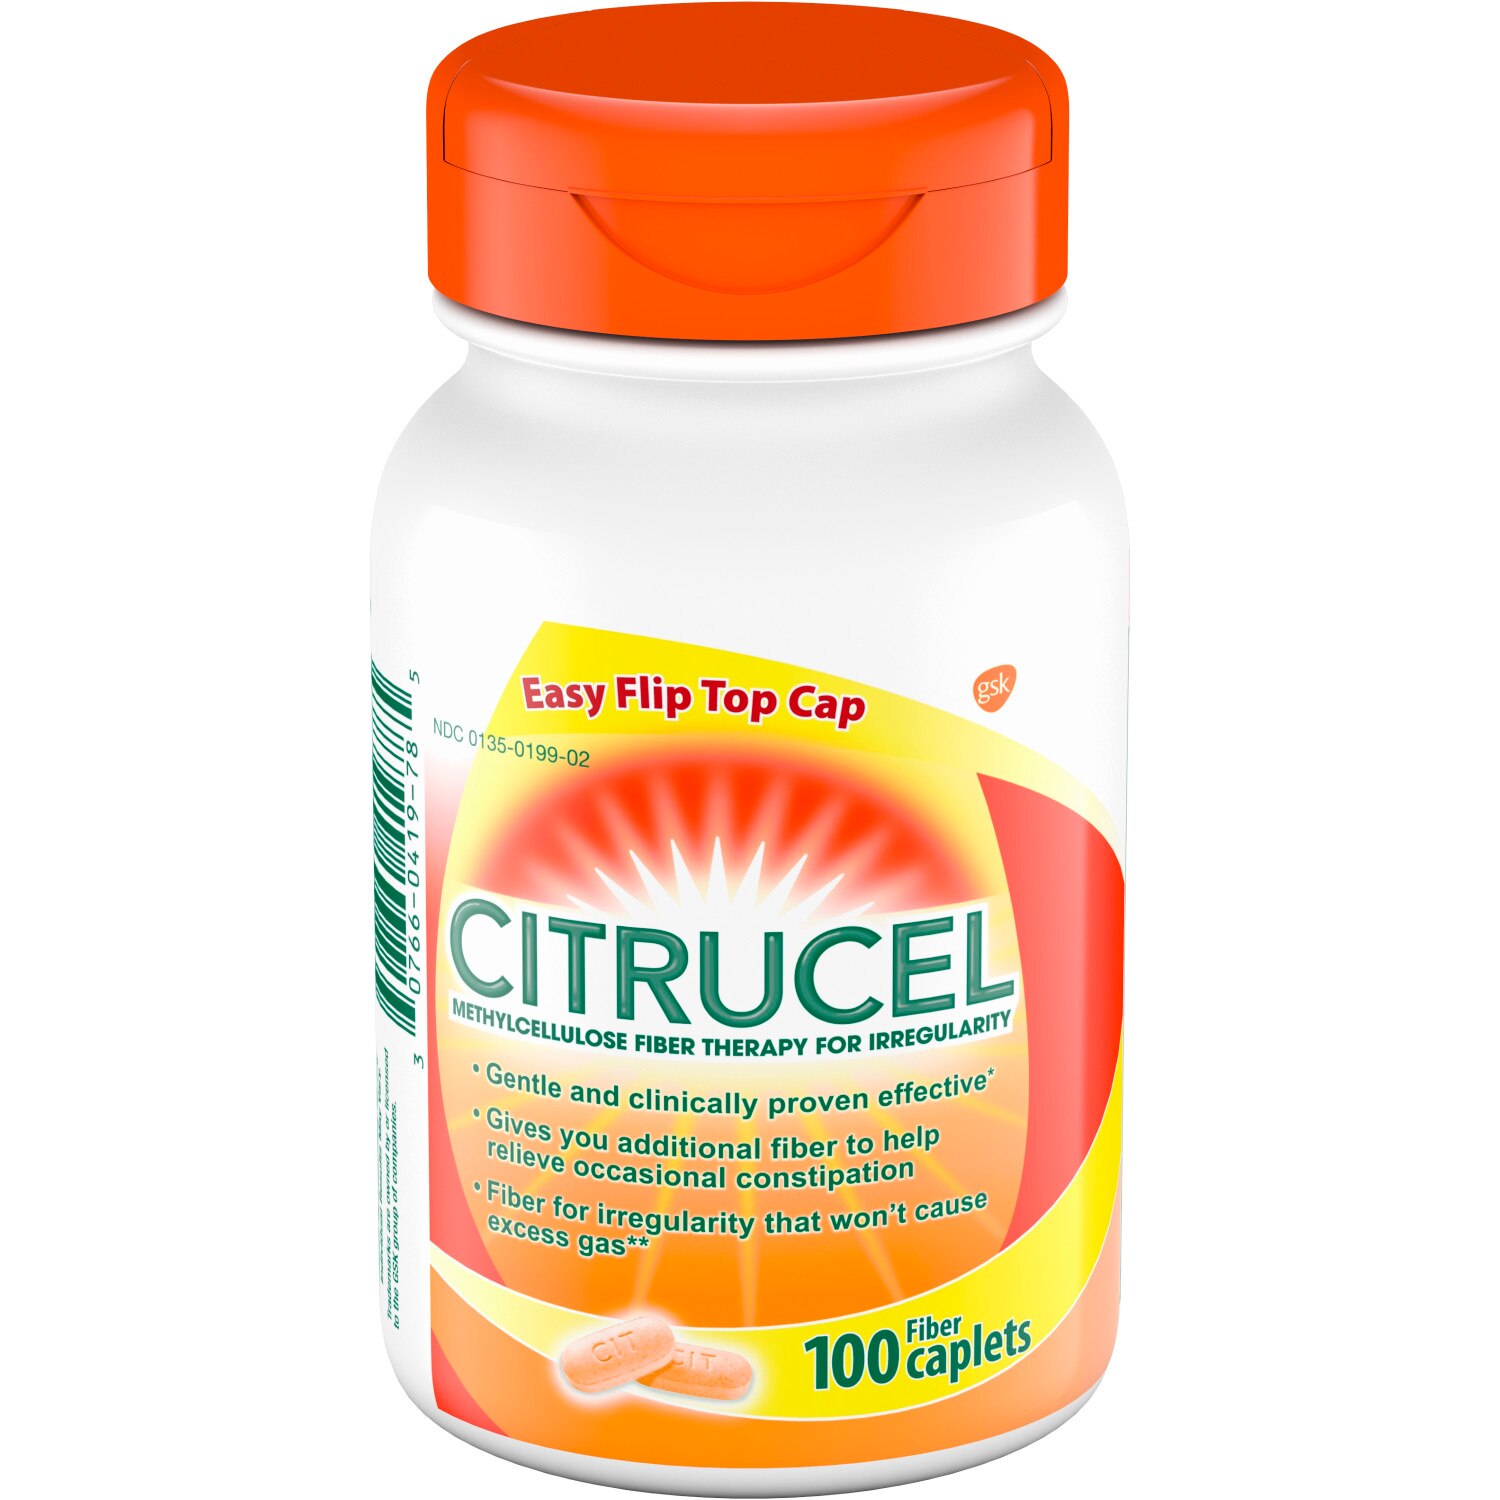 Citrucel Caplets Fiber Therapy for Occasional Constipation Relief, 100 count